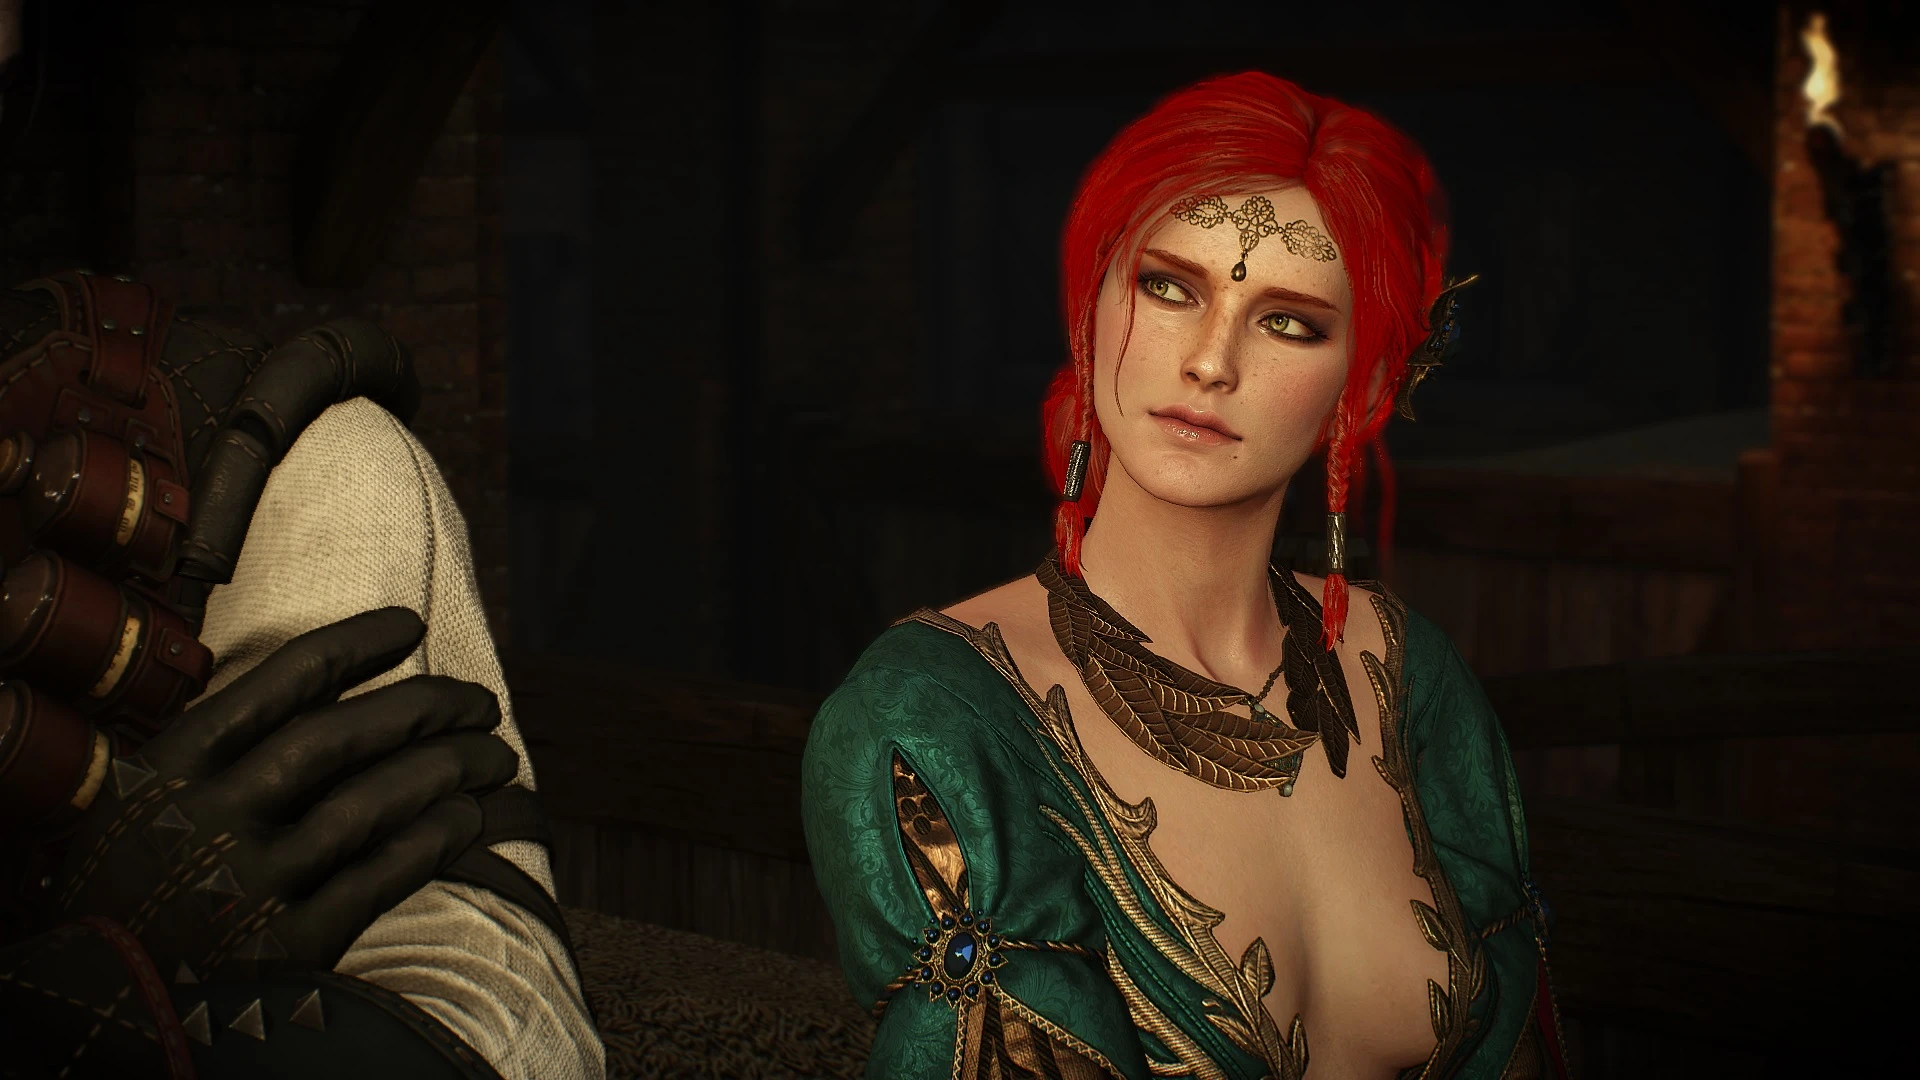 The witcher 3 alternative look for yennefer фото 87